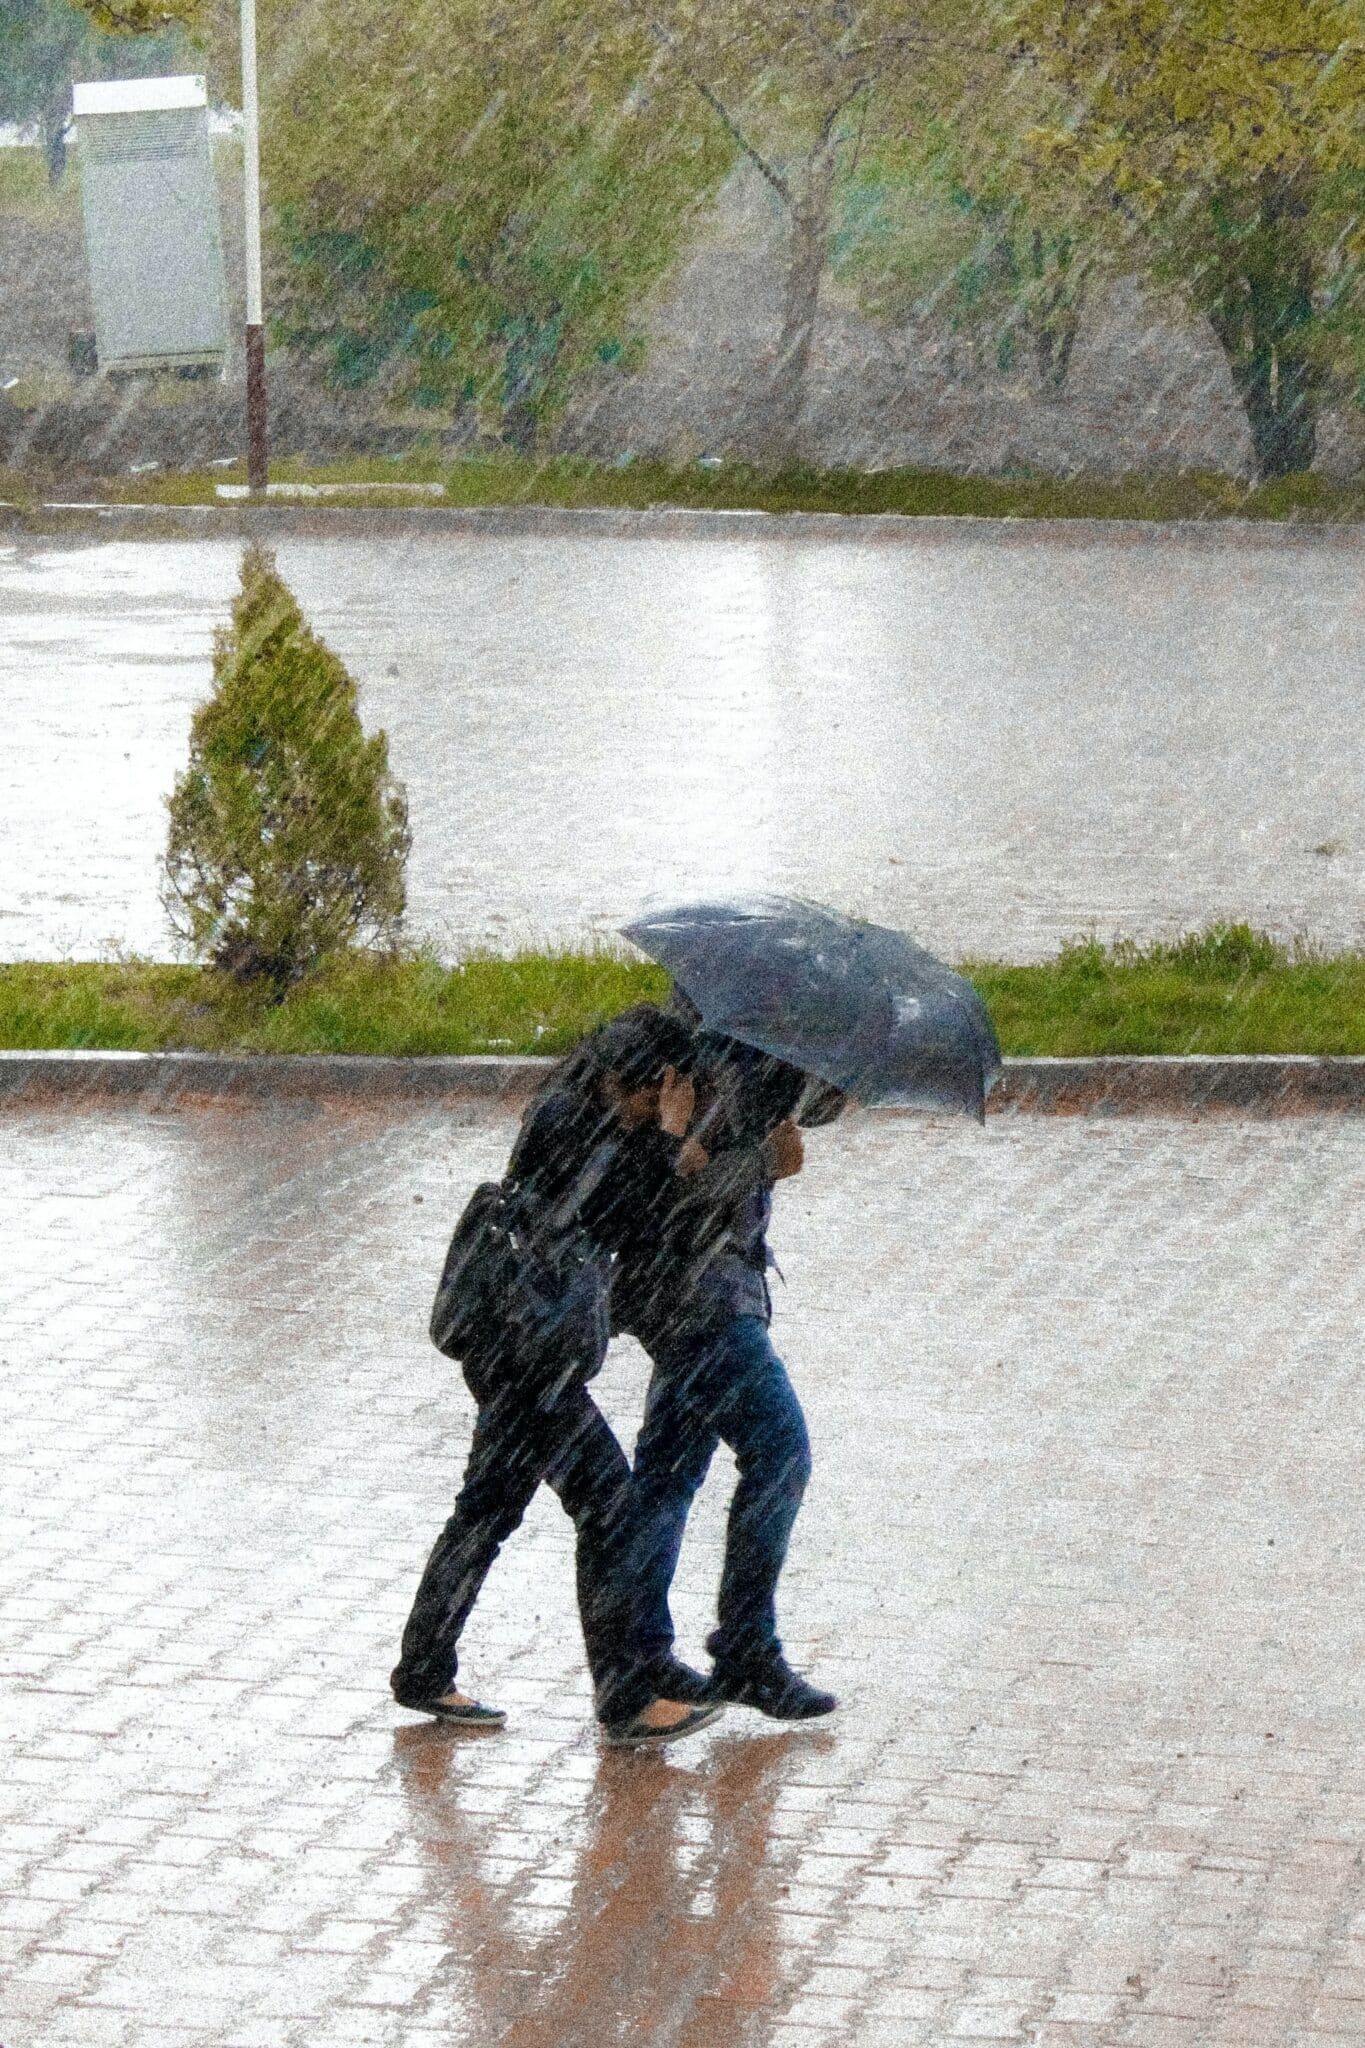 Two people huddled under an umbrella and walking against a heavy downpour. Illustrates wind and rain, two challenges you might face while doing a home inspection in bad weather.